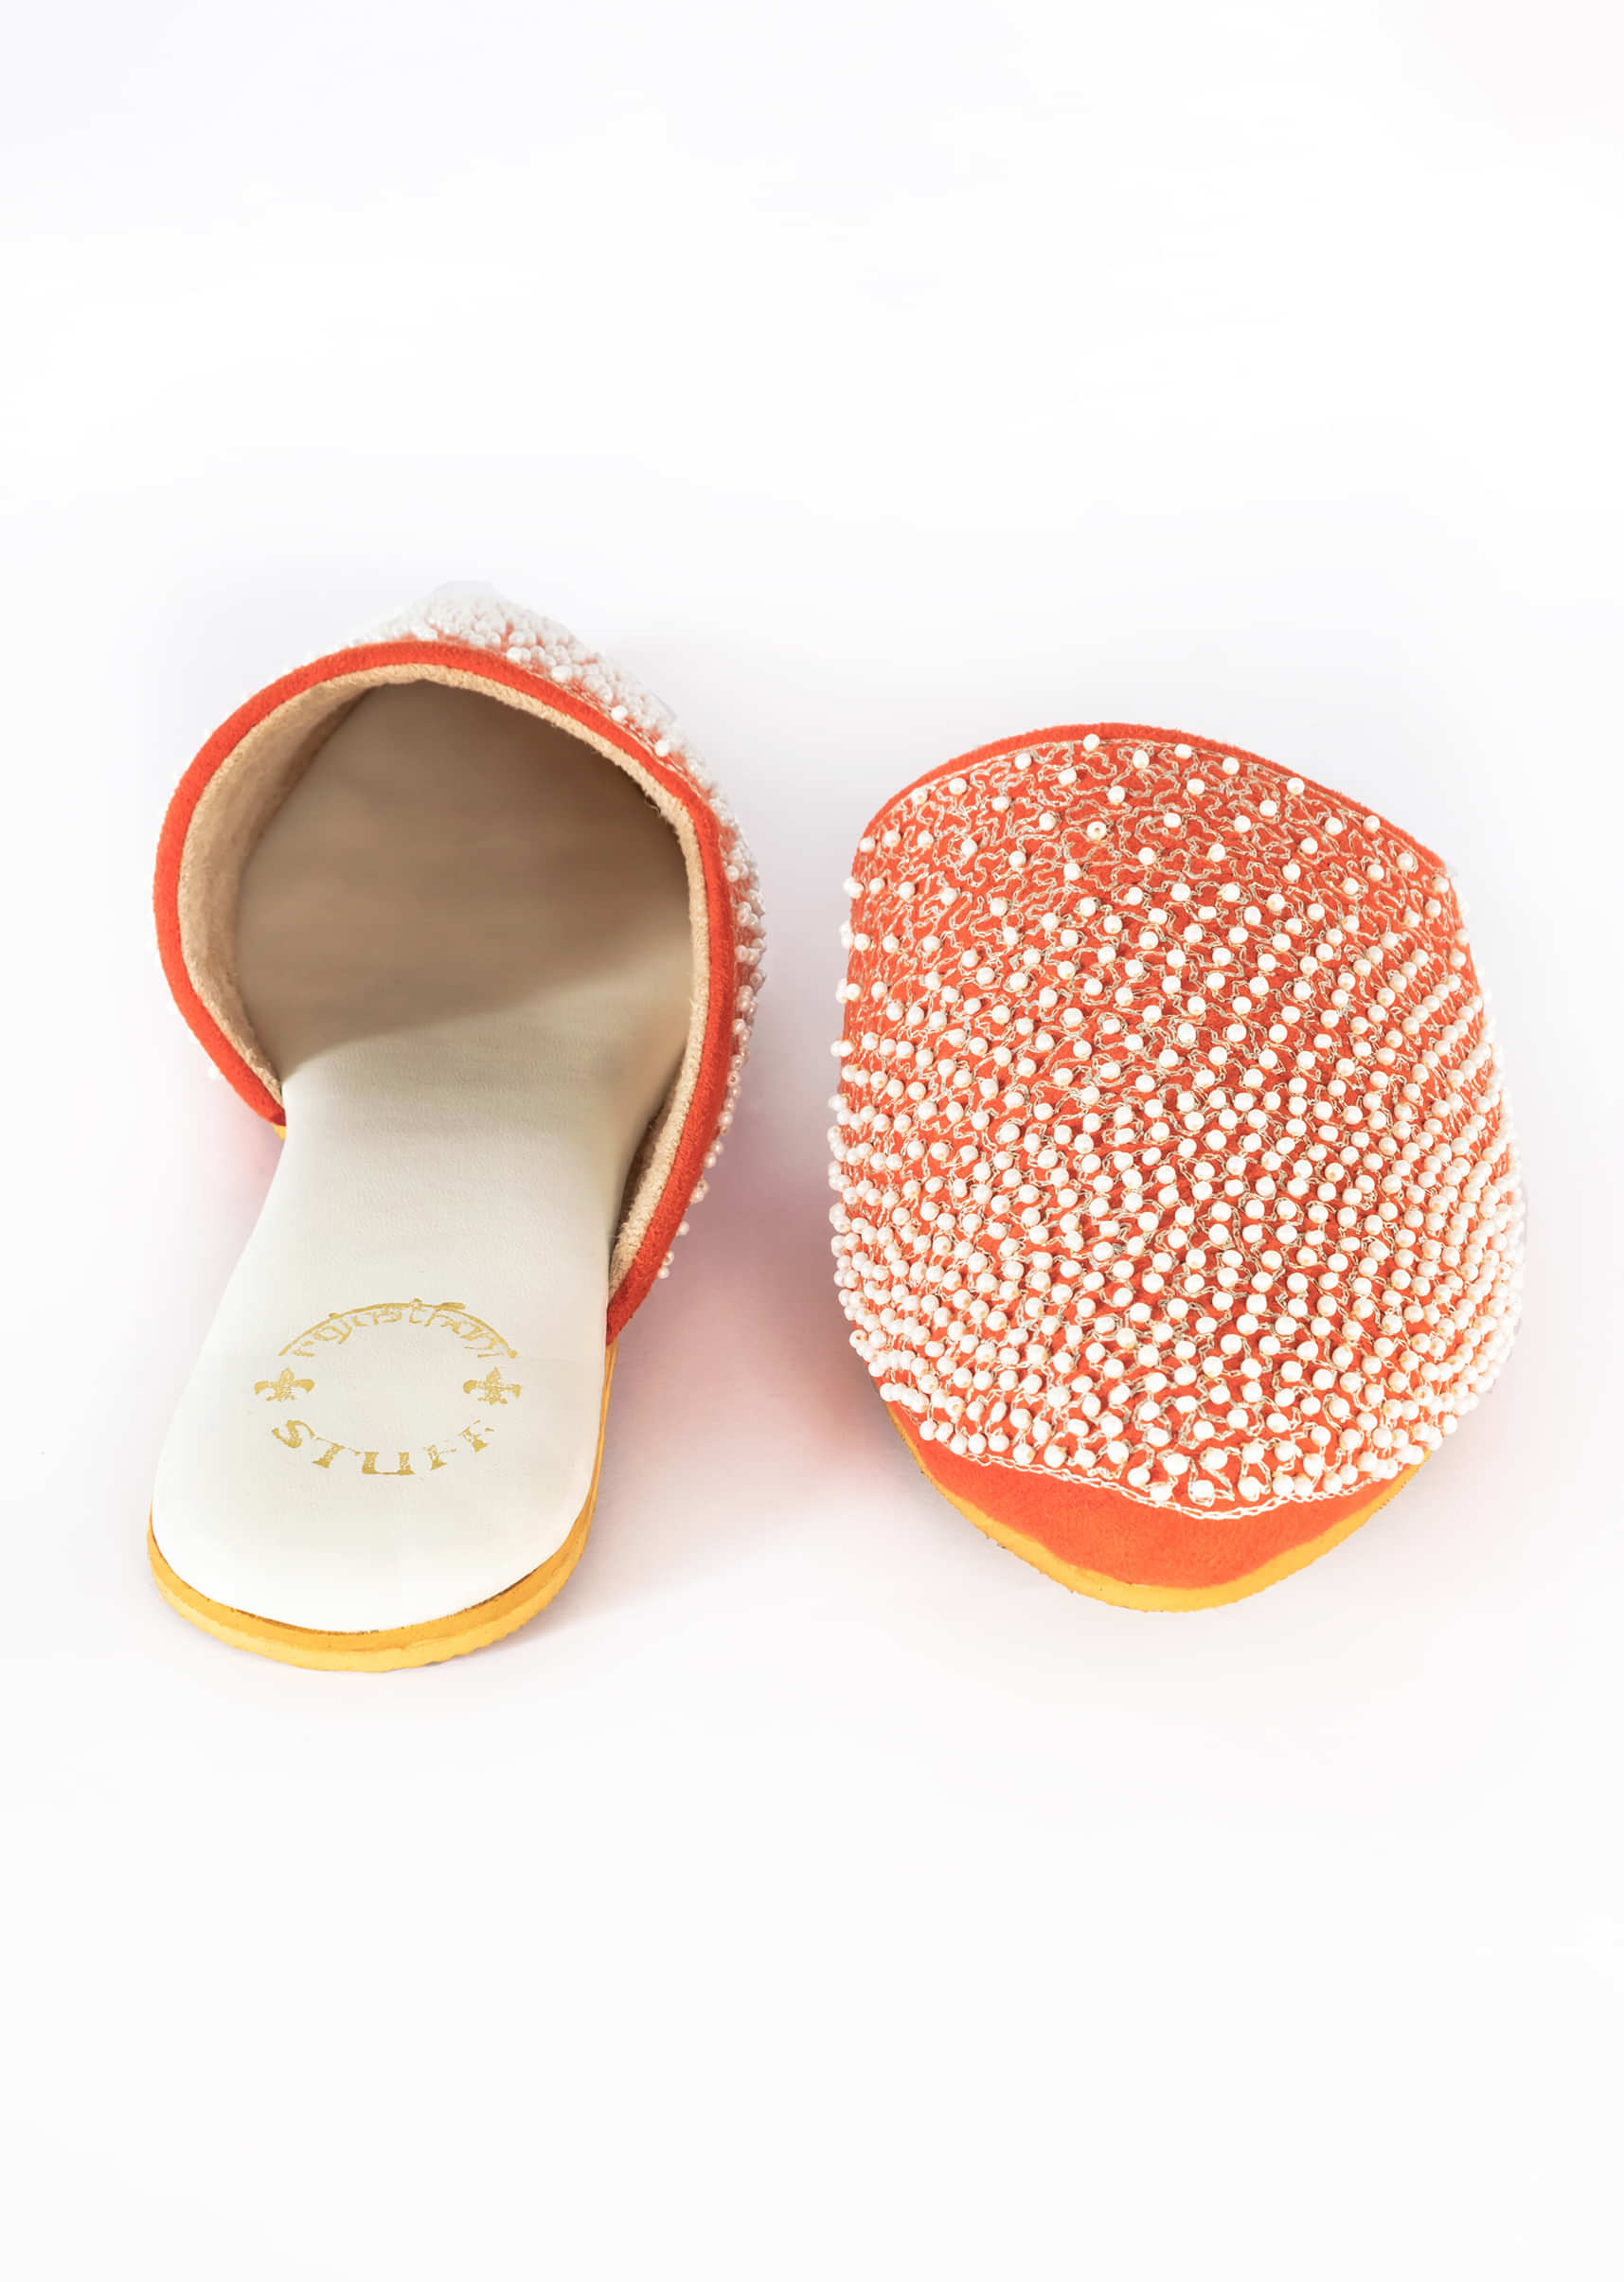 Fiery Orange Embroidered Mules In Suede With Beads Work